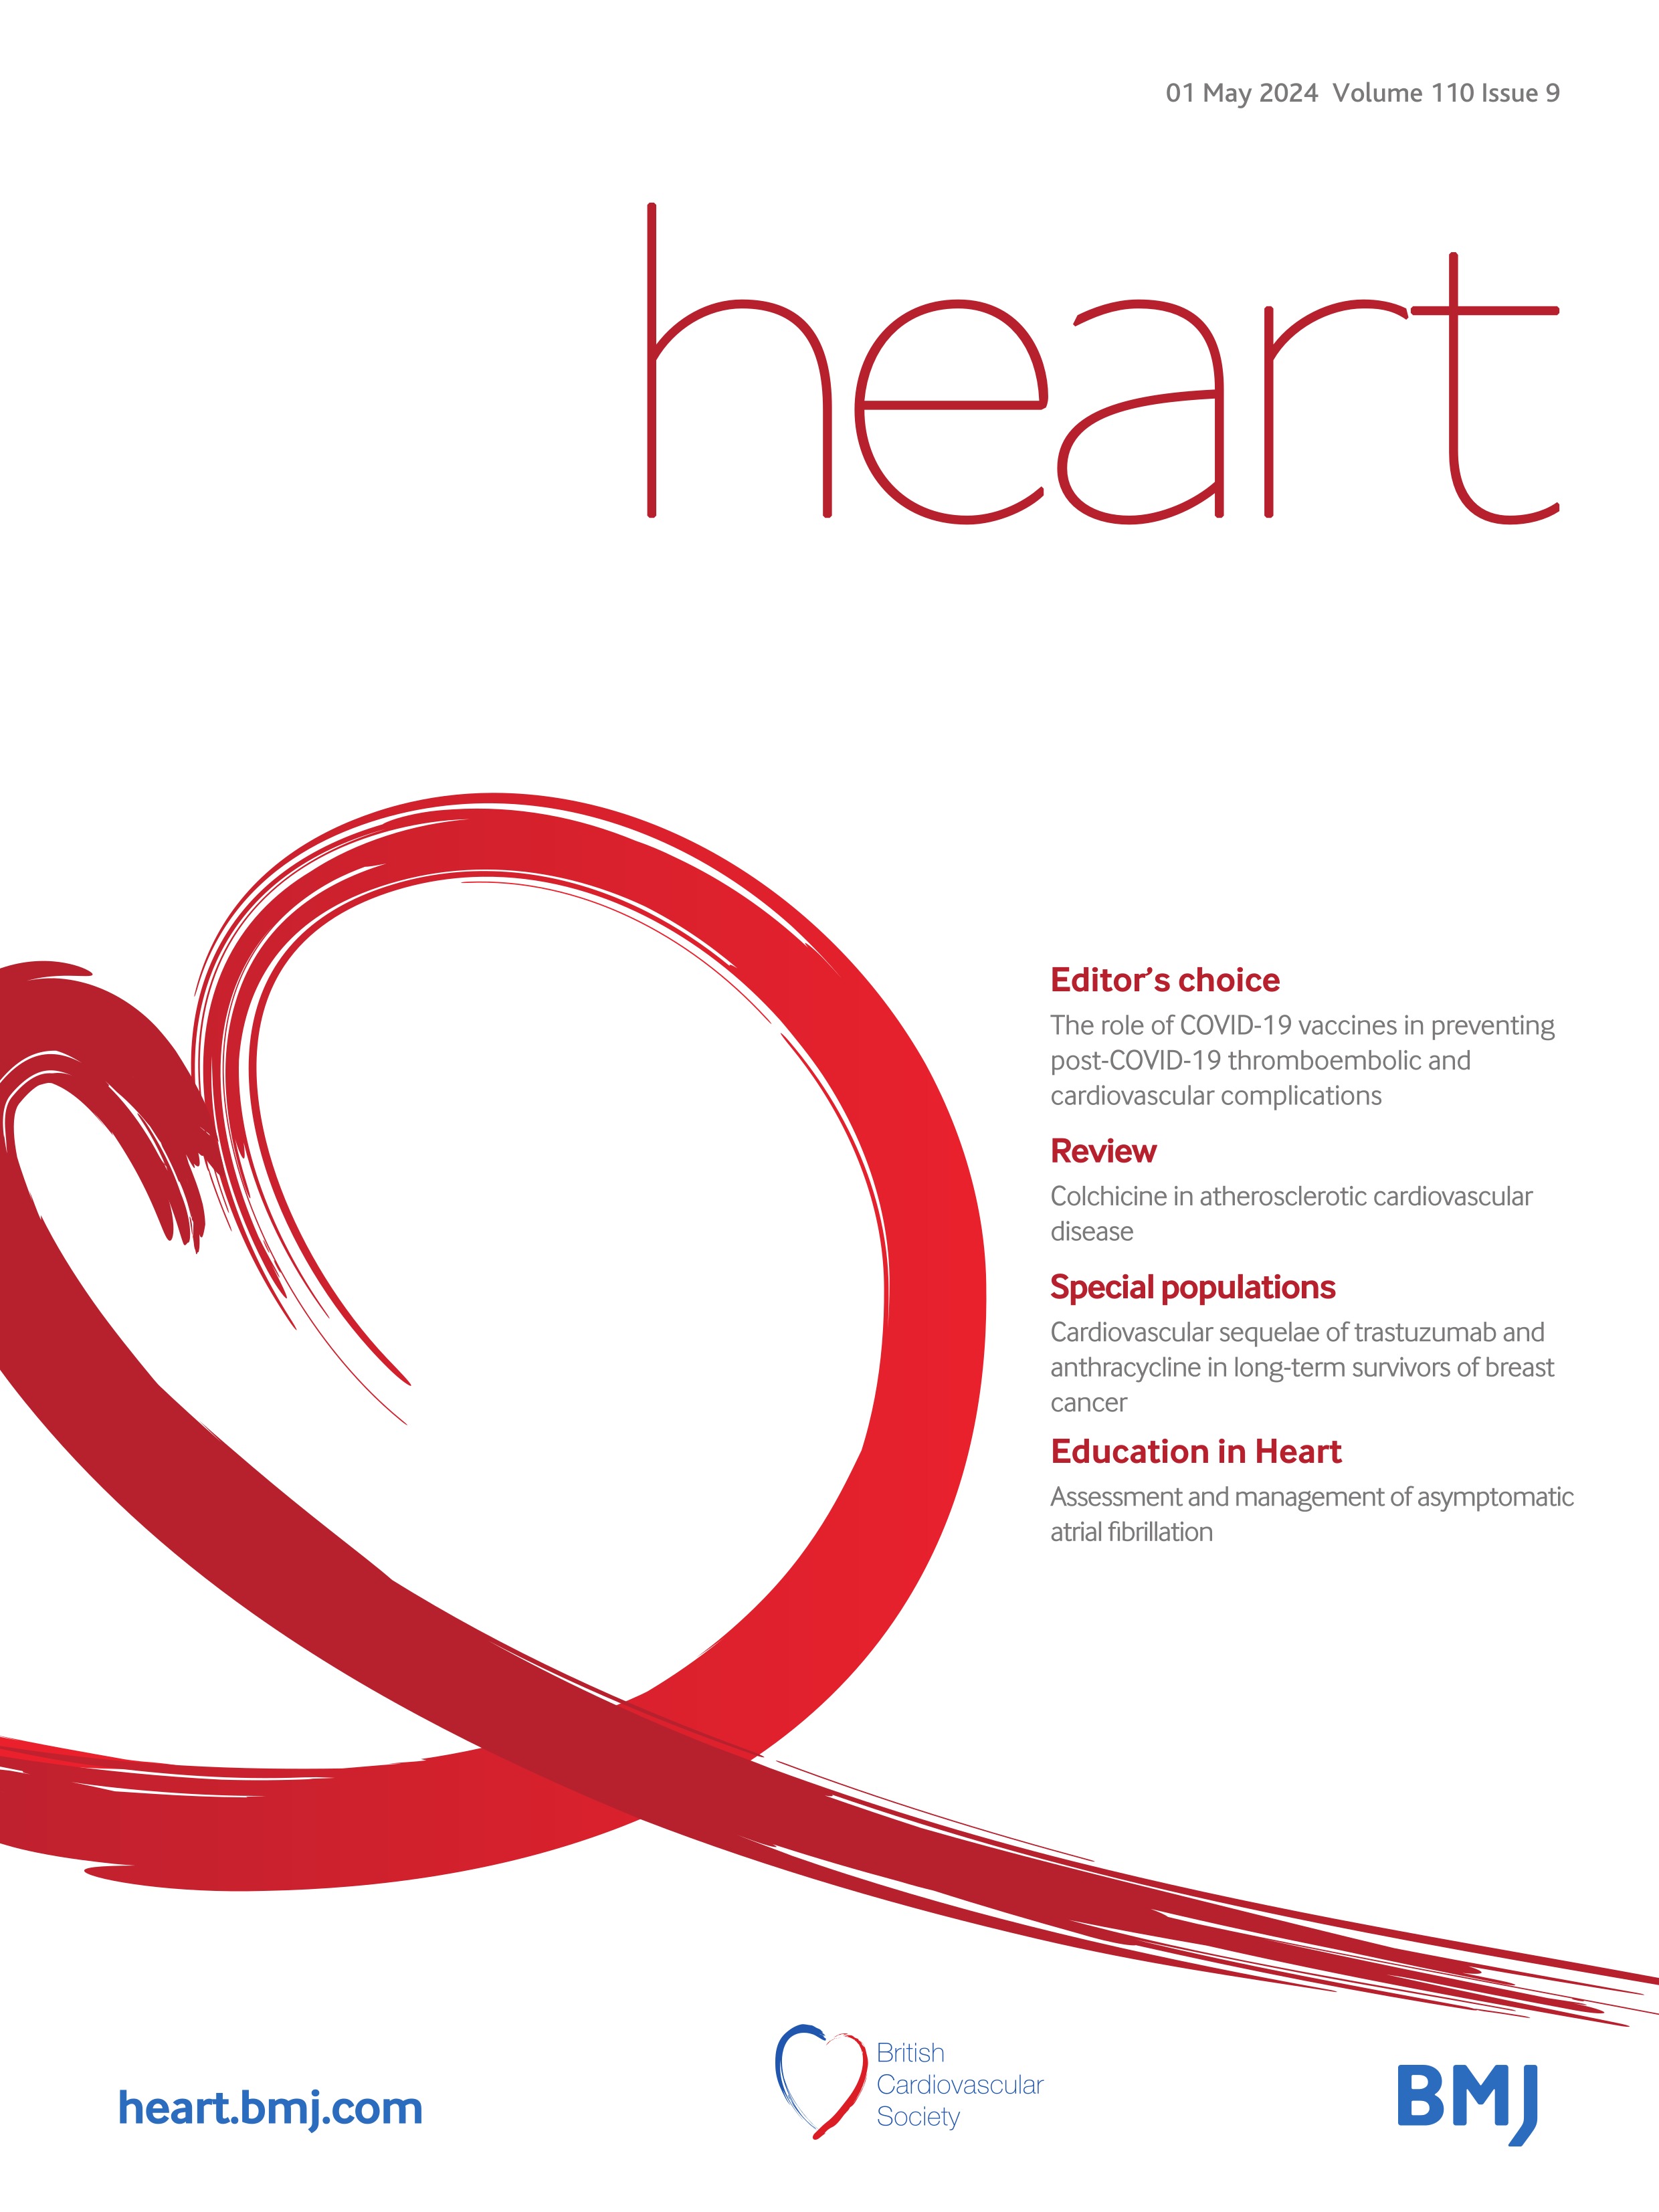 Assessment and management of asymptomatic atrial fibrillation